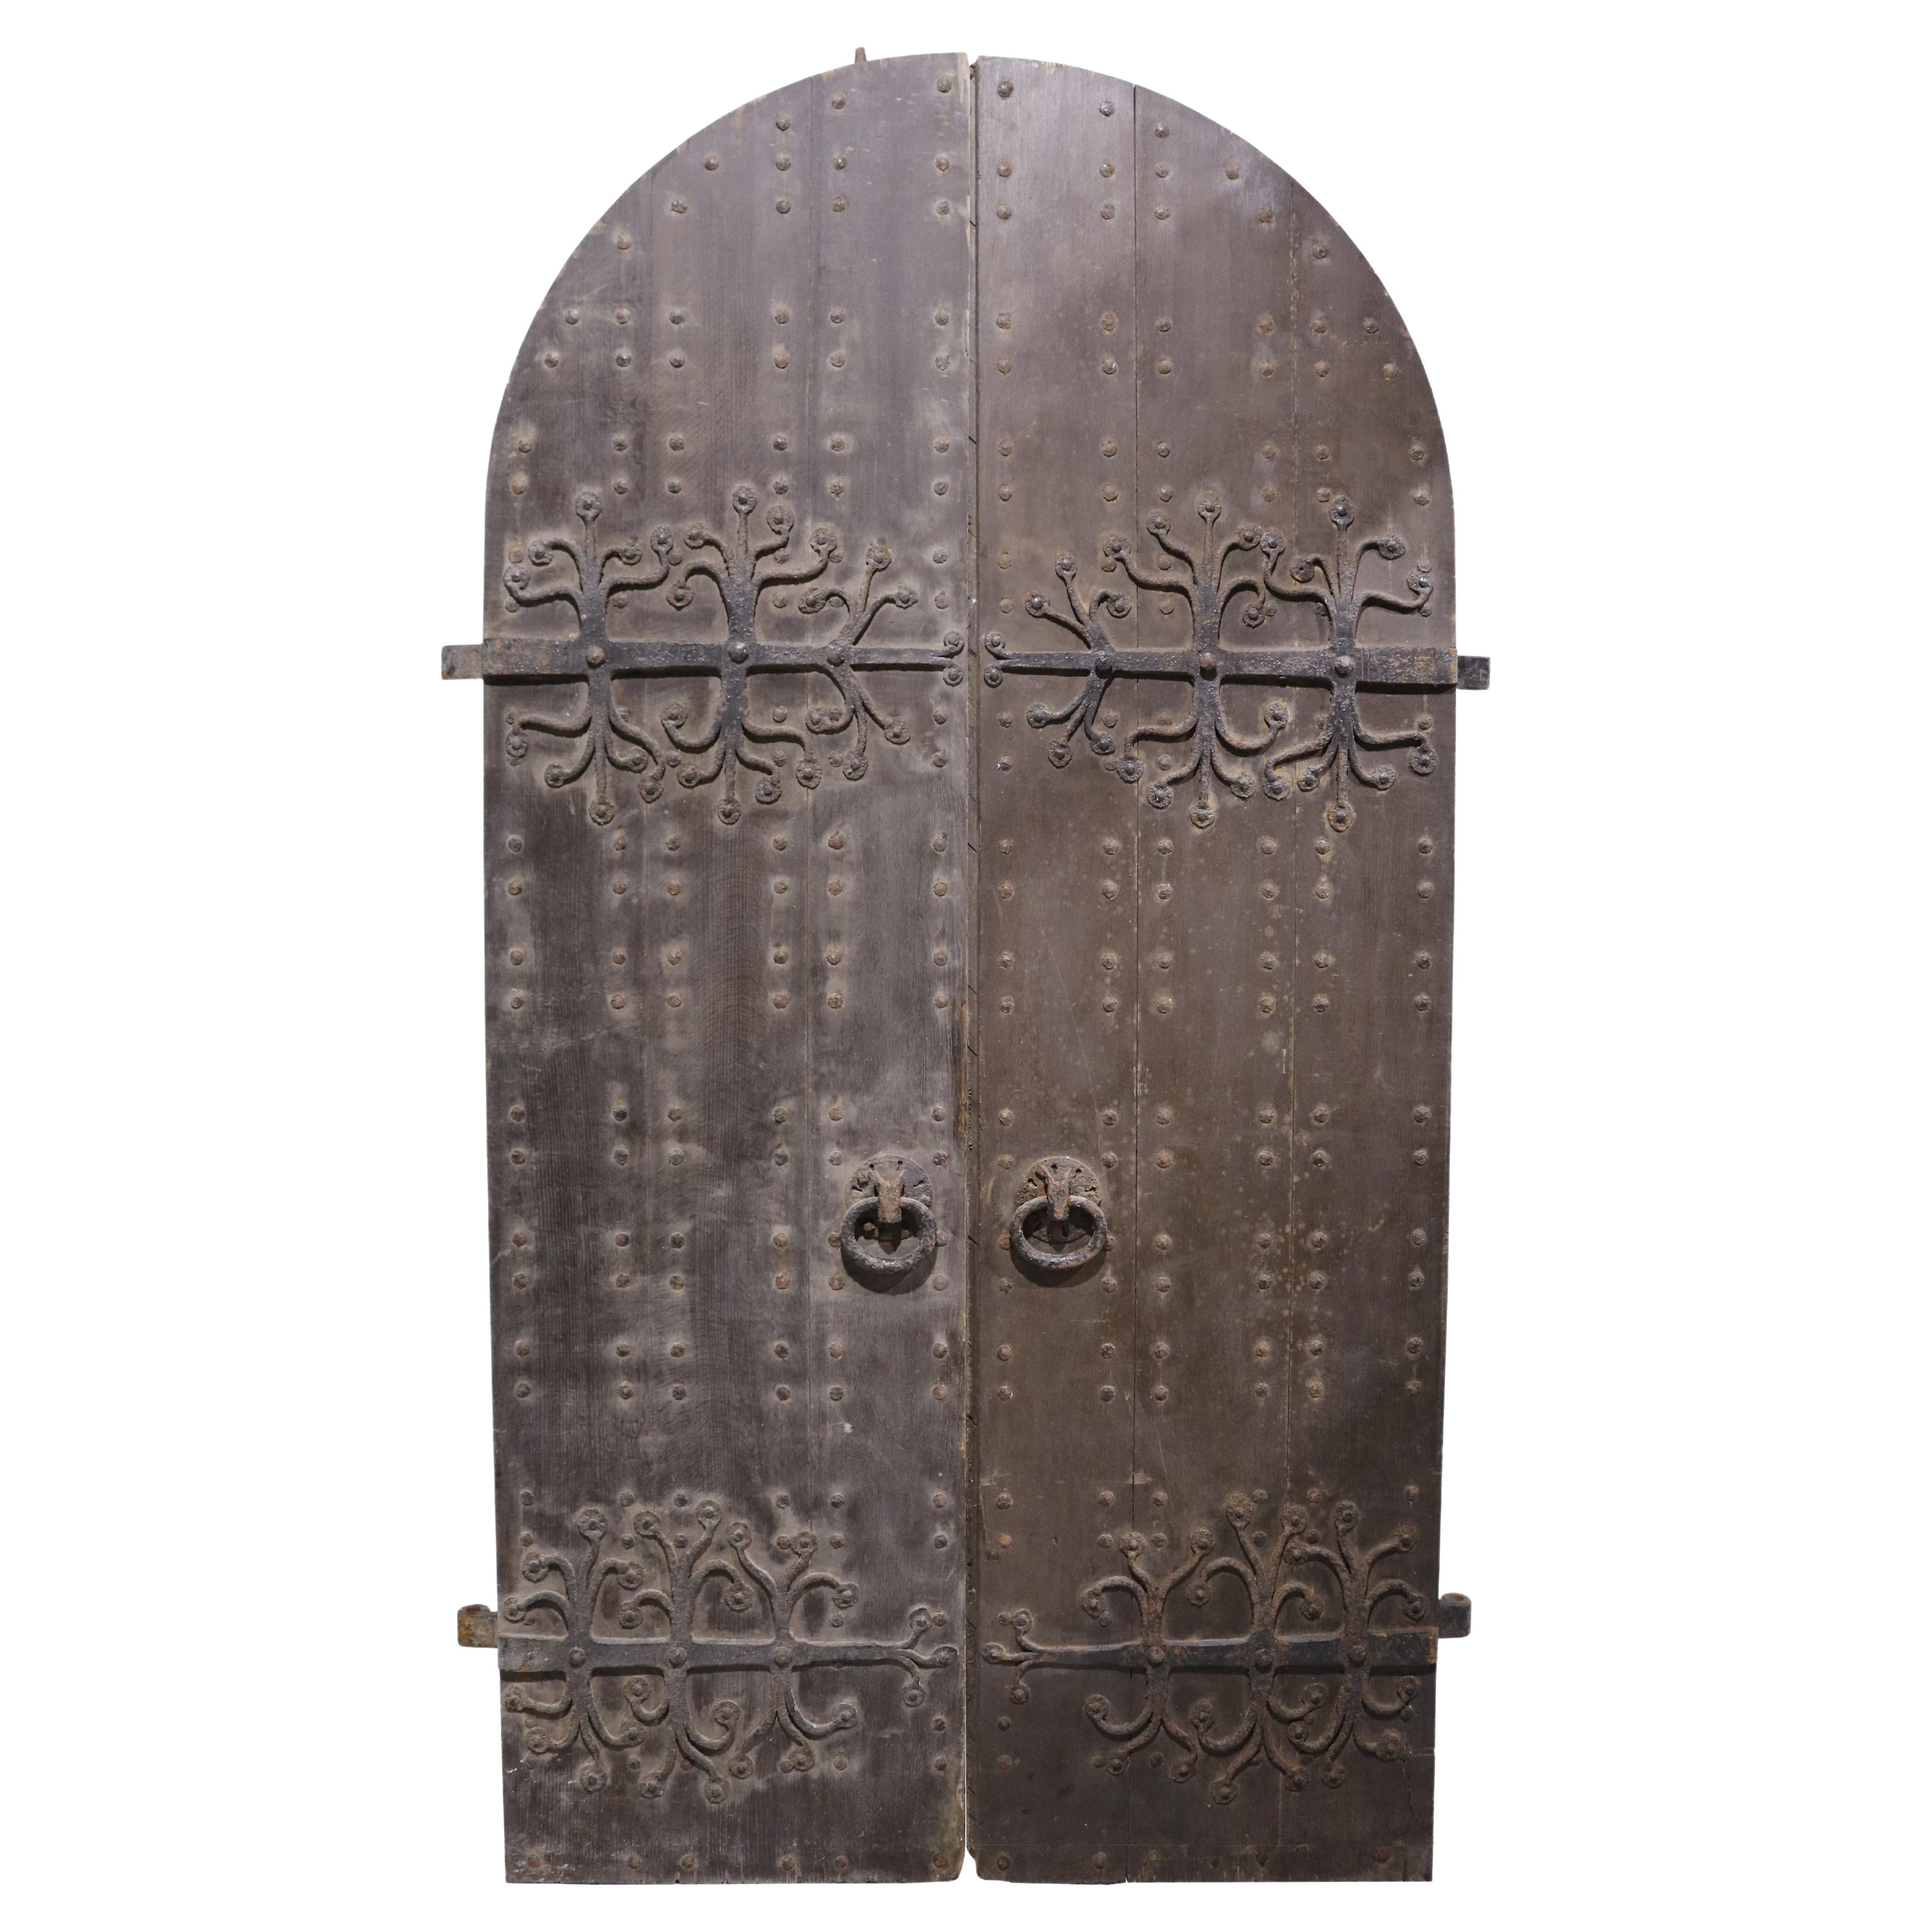 Medieval Style English Church Doors For Sale